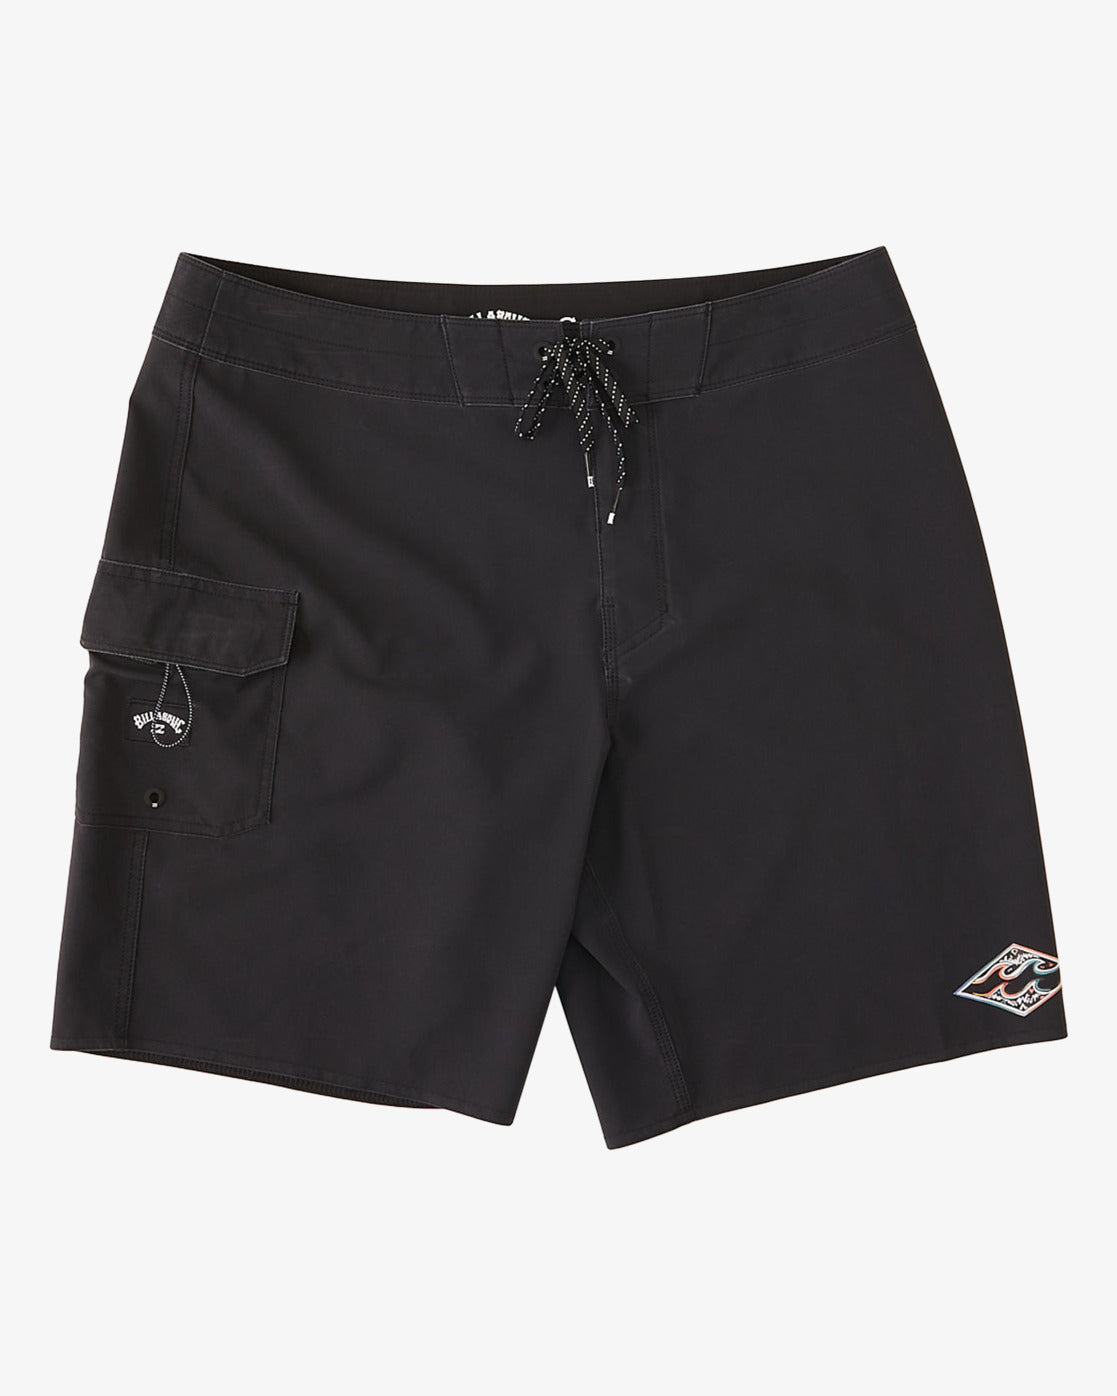 Billabong Riot Pro Youth Boardshorts in black from front